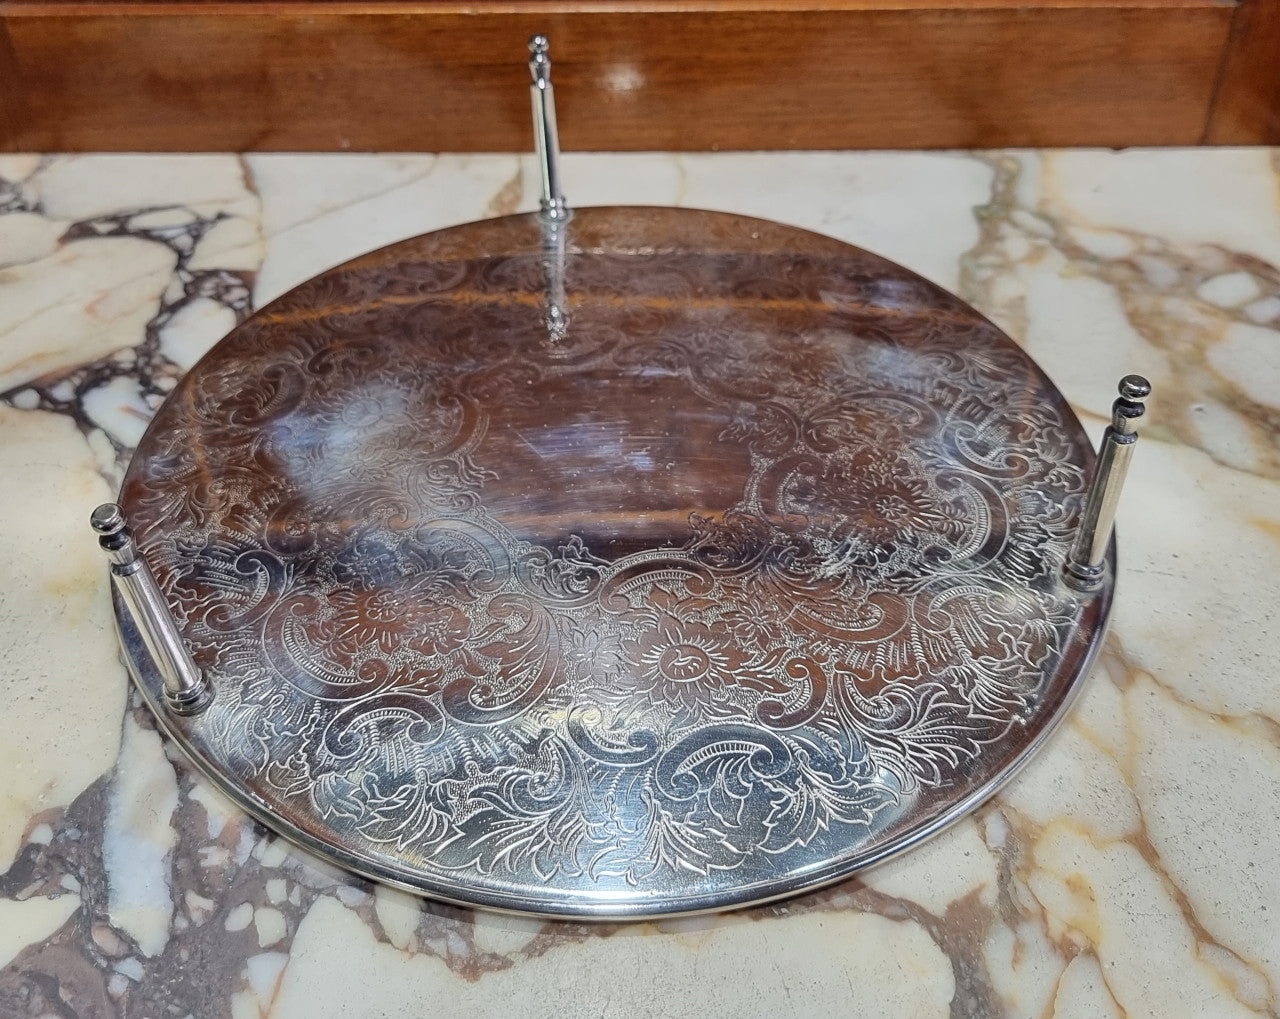 Five Strachan and two Rodd silver plate table coasters in a silver plate stand. In good original detailed condition.